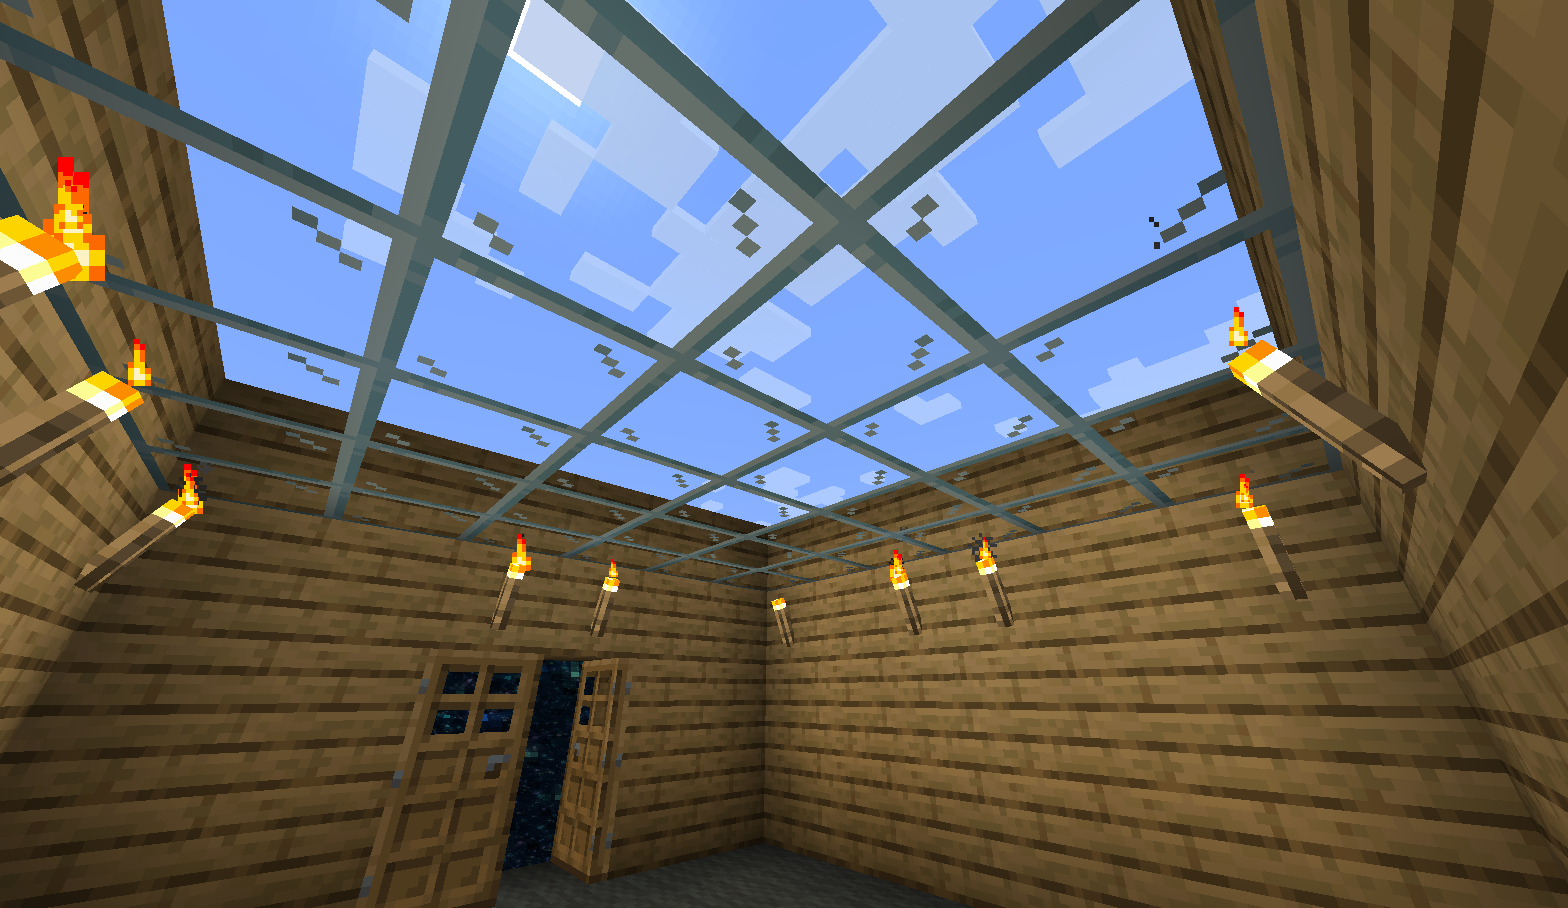 A simple wooden house with a glass ceiling revealing a sky - or a false sky made of Blocks of Sky! A door leading to the void can also be seen on the wall.